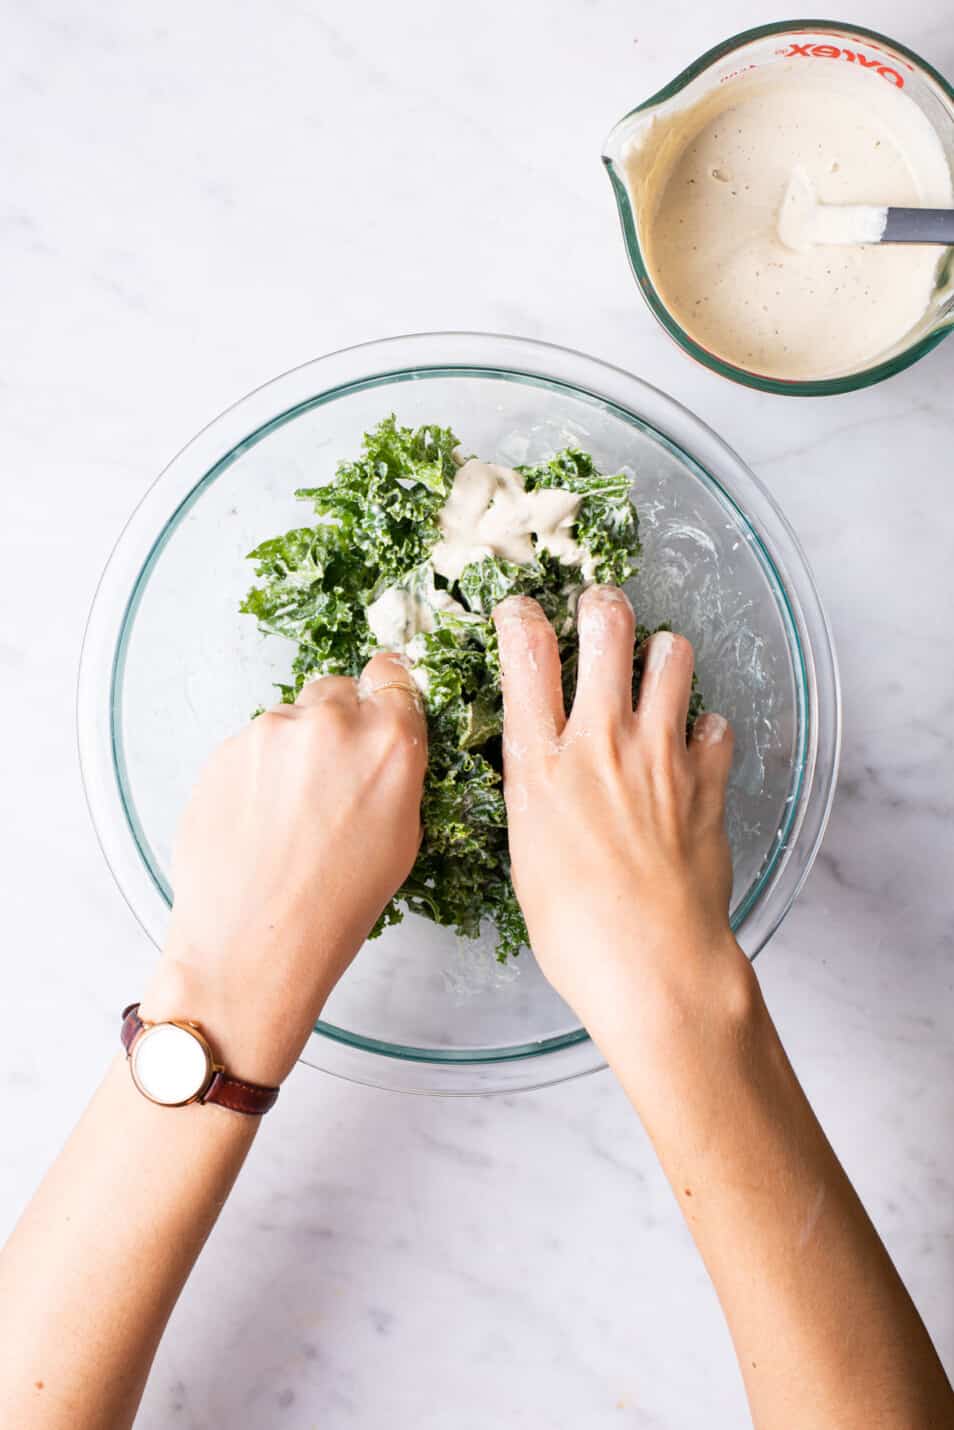 Woman's hands massaging kale with creamy cashew dressing.